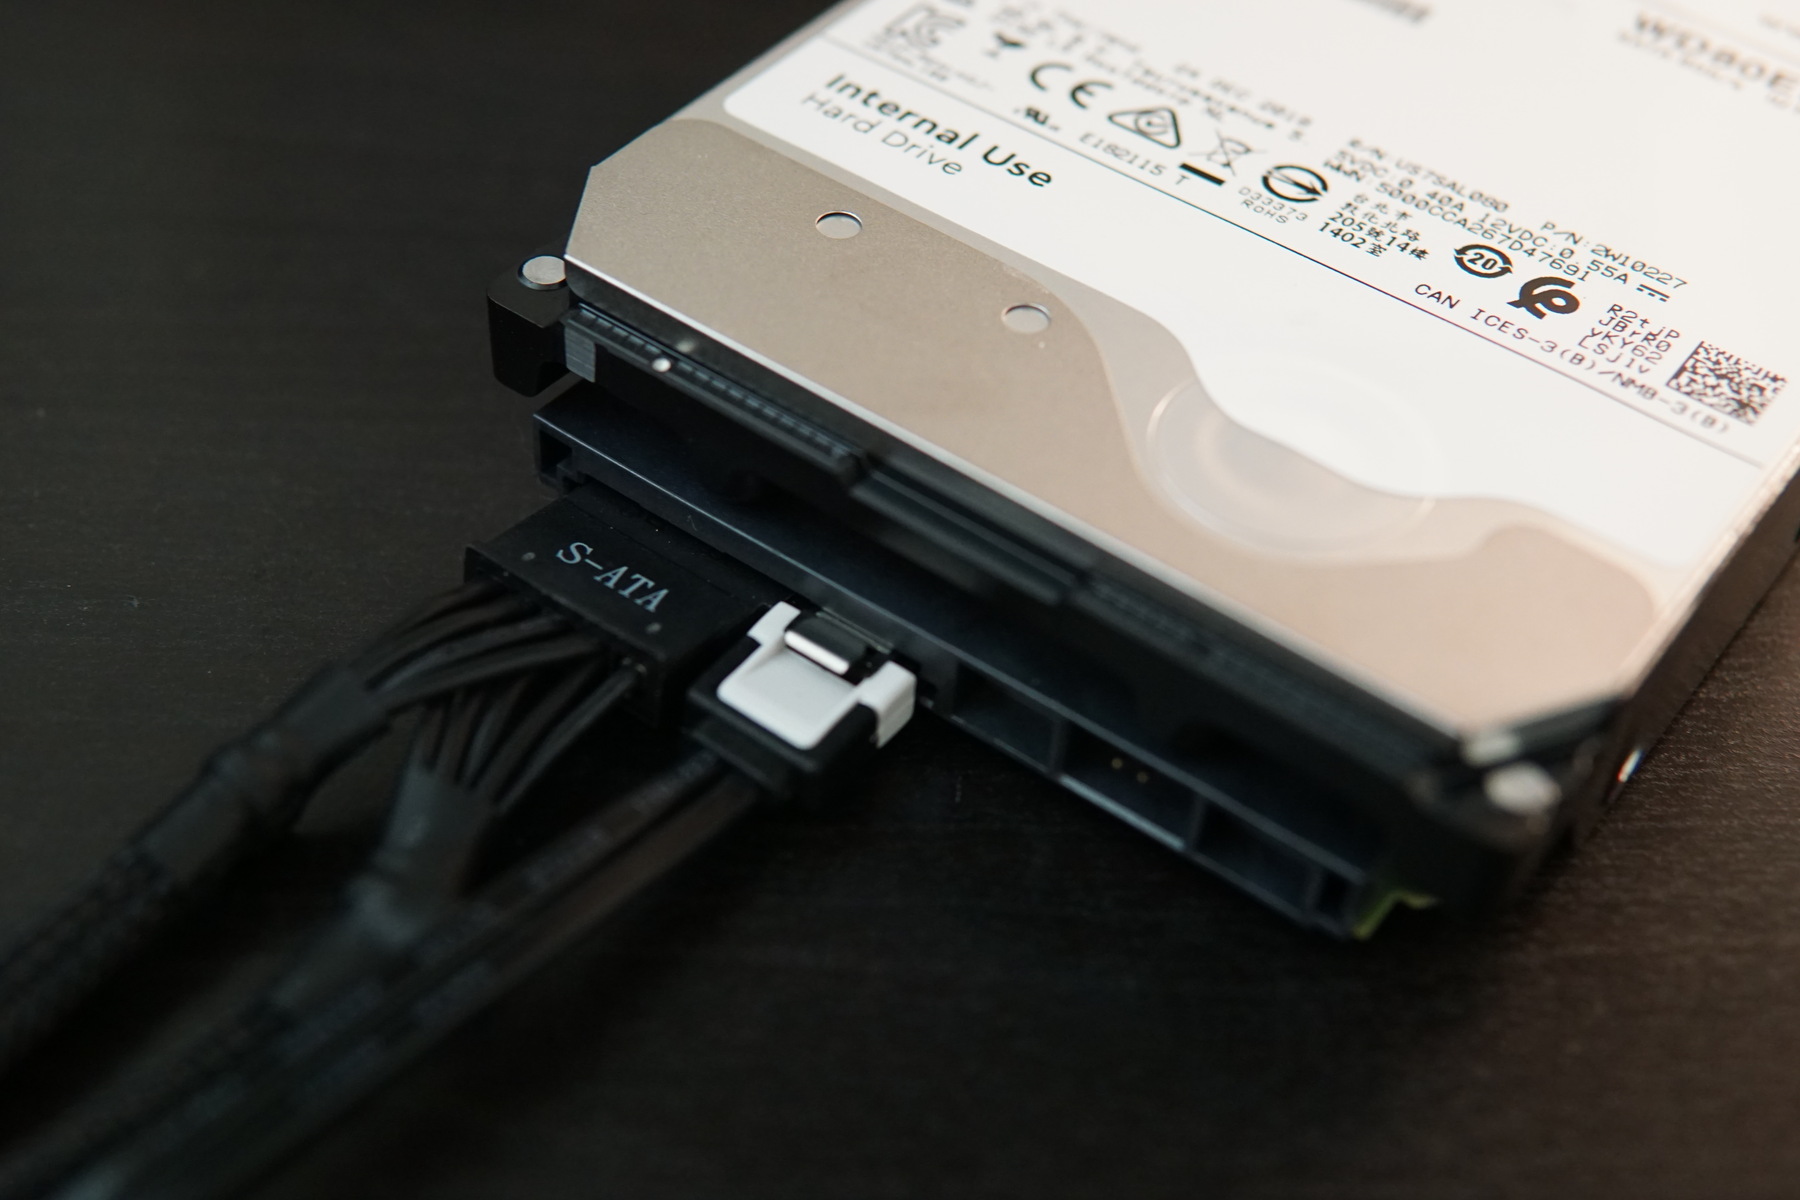 How To Use An External Hard Drive To Increase RAM